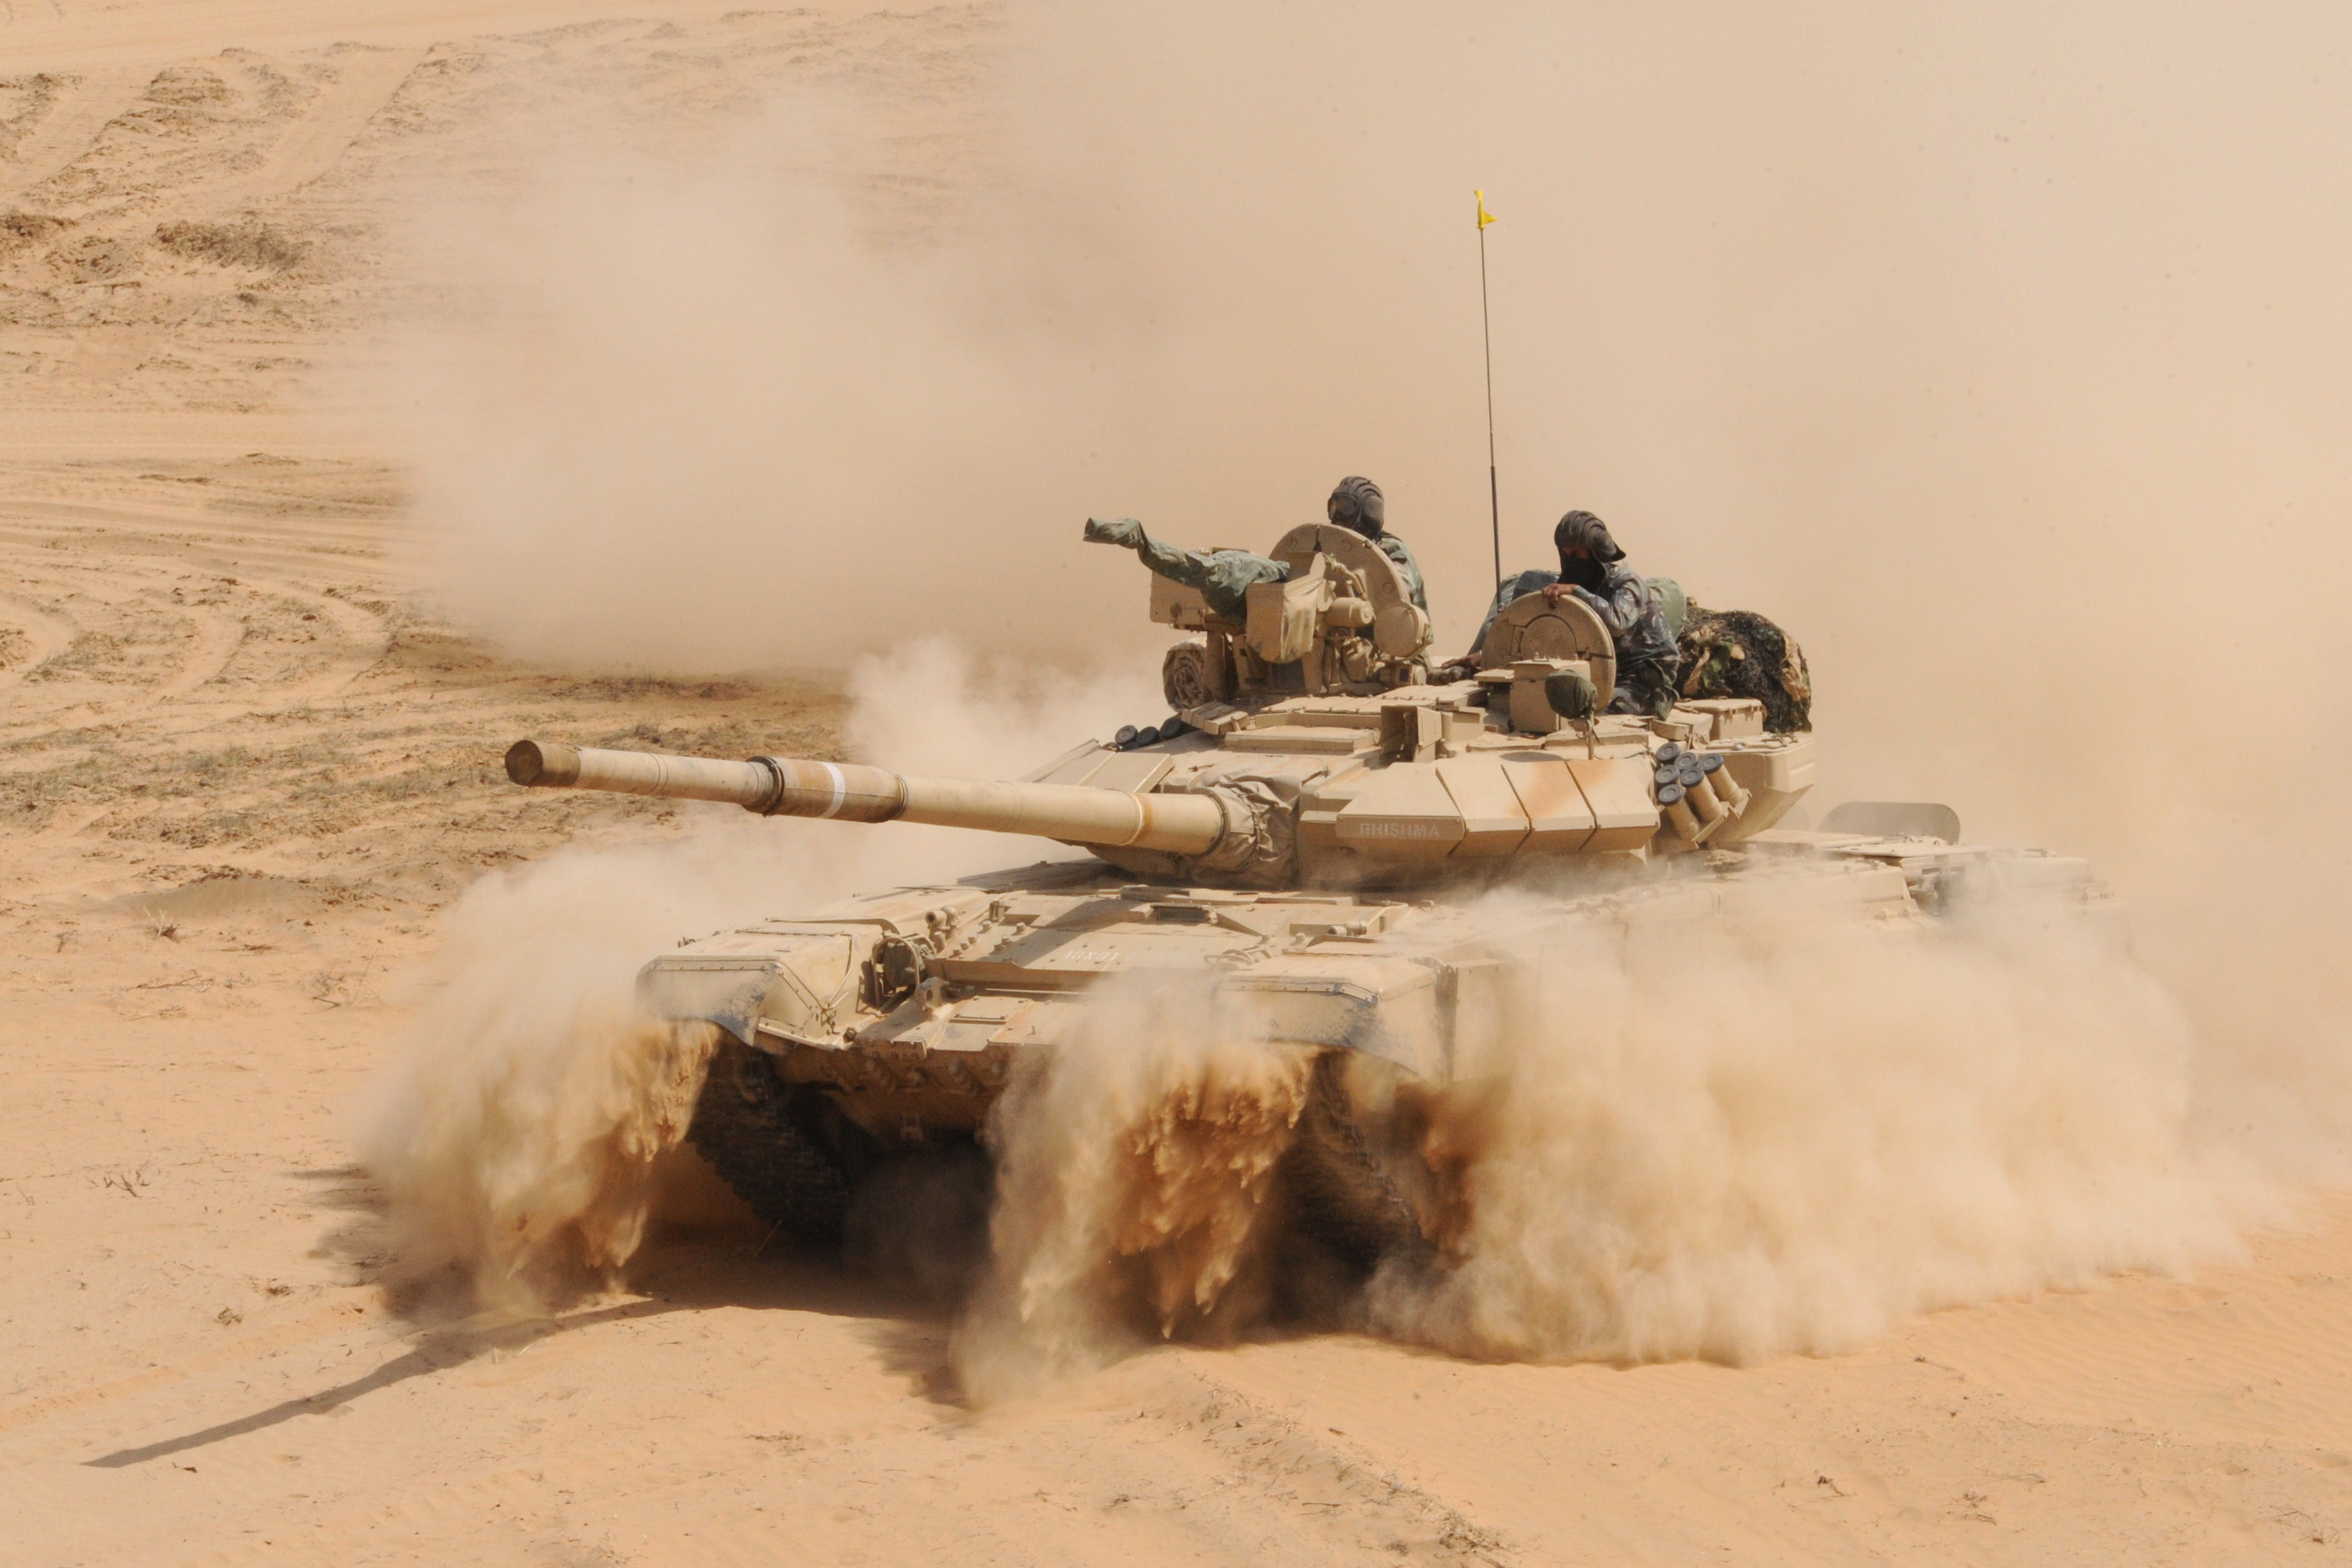 In 2001, New Delhi reportedly bought 310 T-90 tanks from Russia.